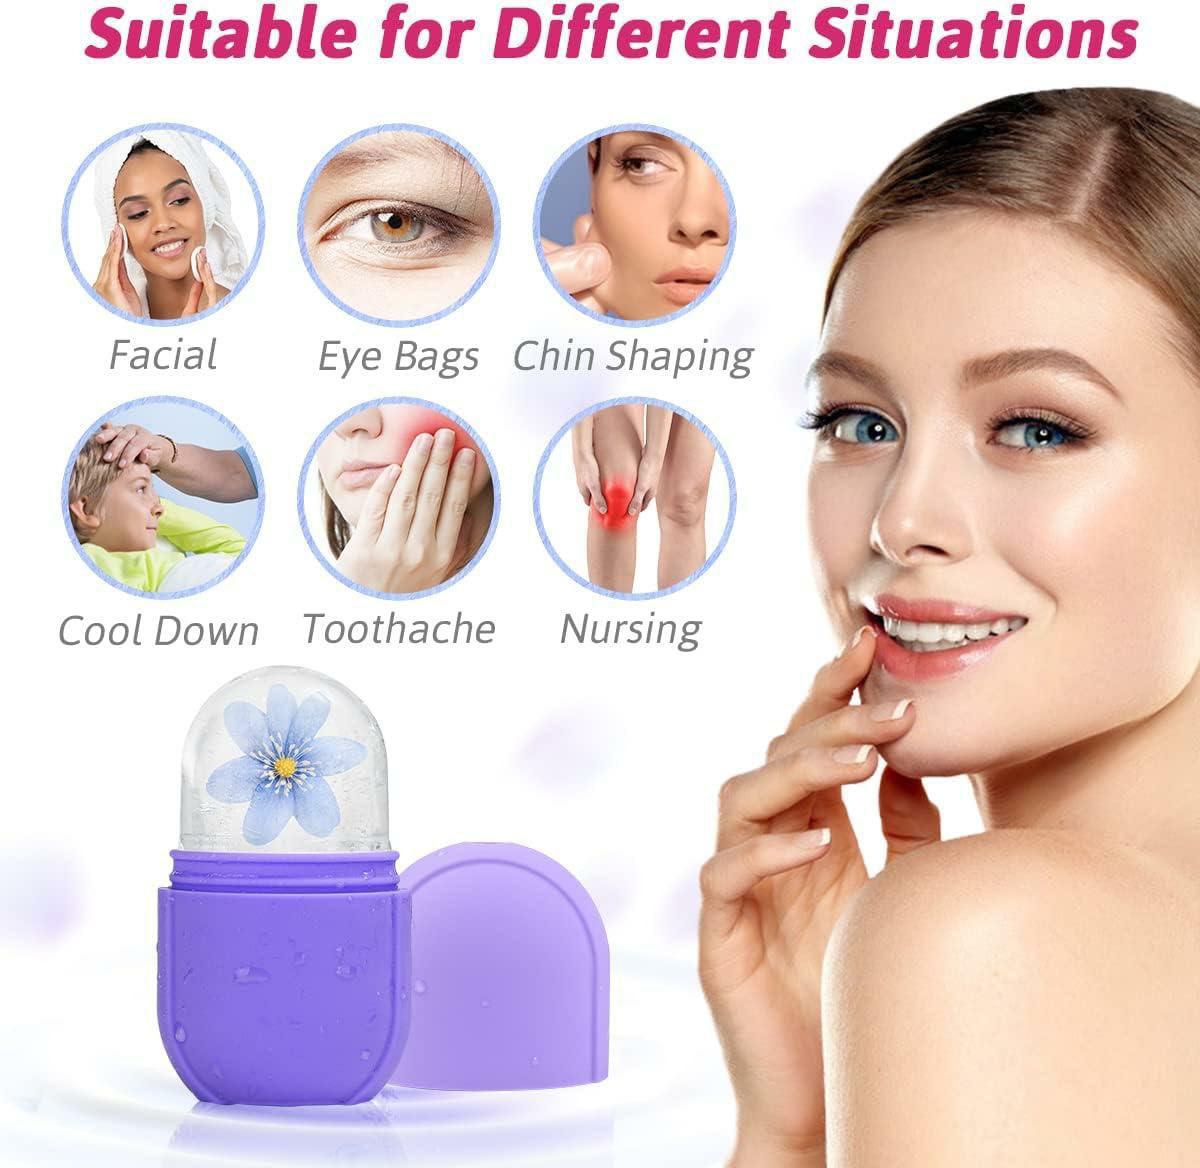 Facial Ice Roller Mold Holder for Face Eyes Reusable Face Ice Roller Mould Tighten and Shrink Pores Brighten Skin Eye Puffiness Treatment